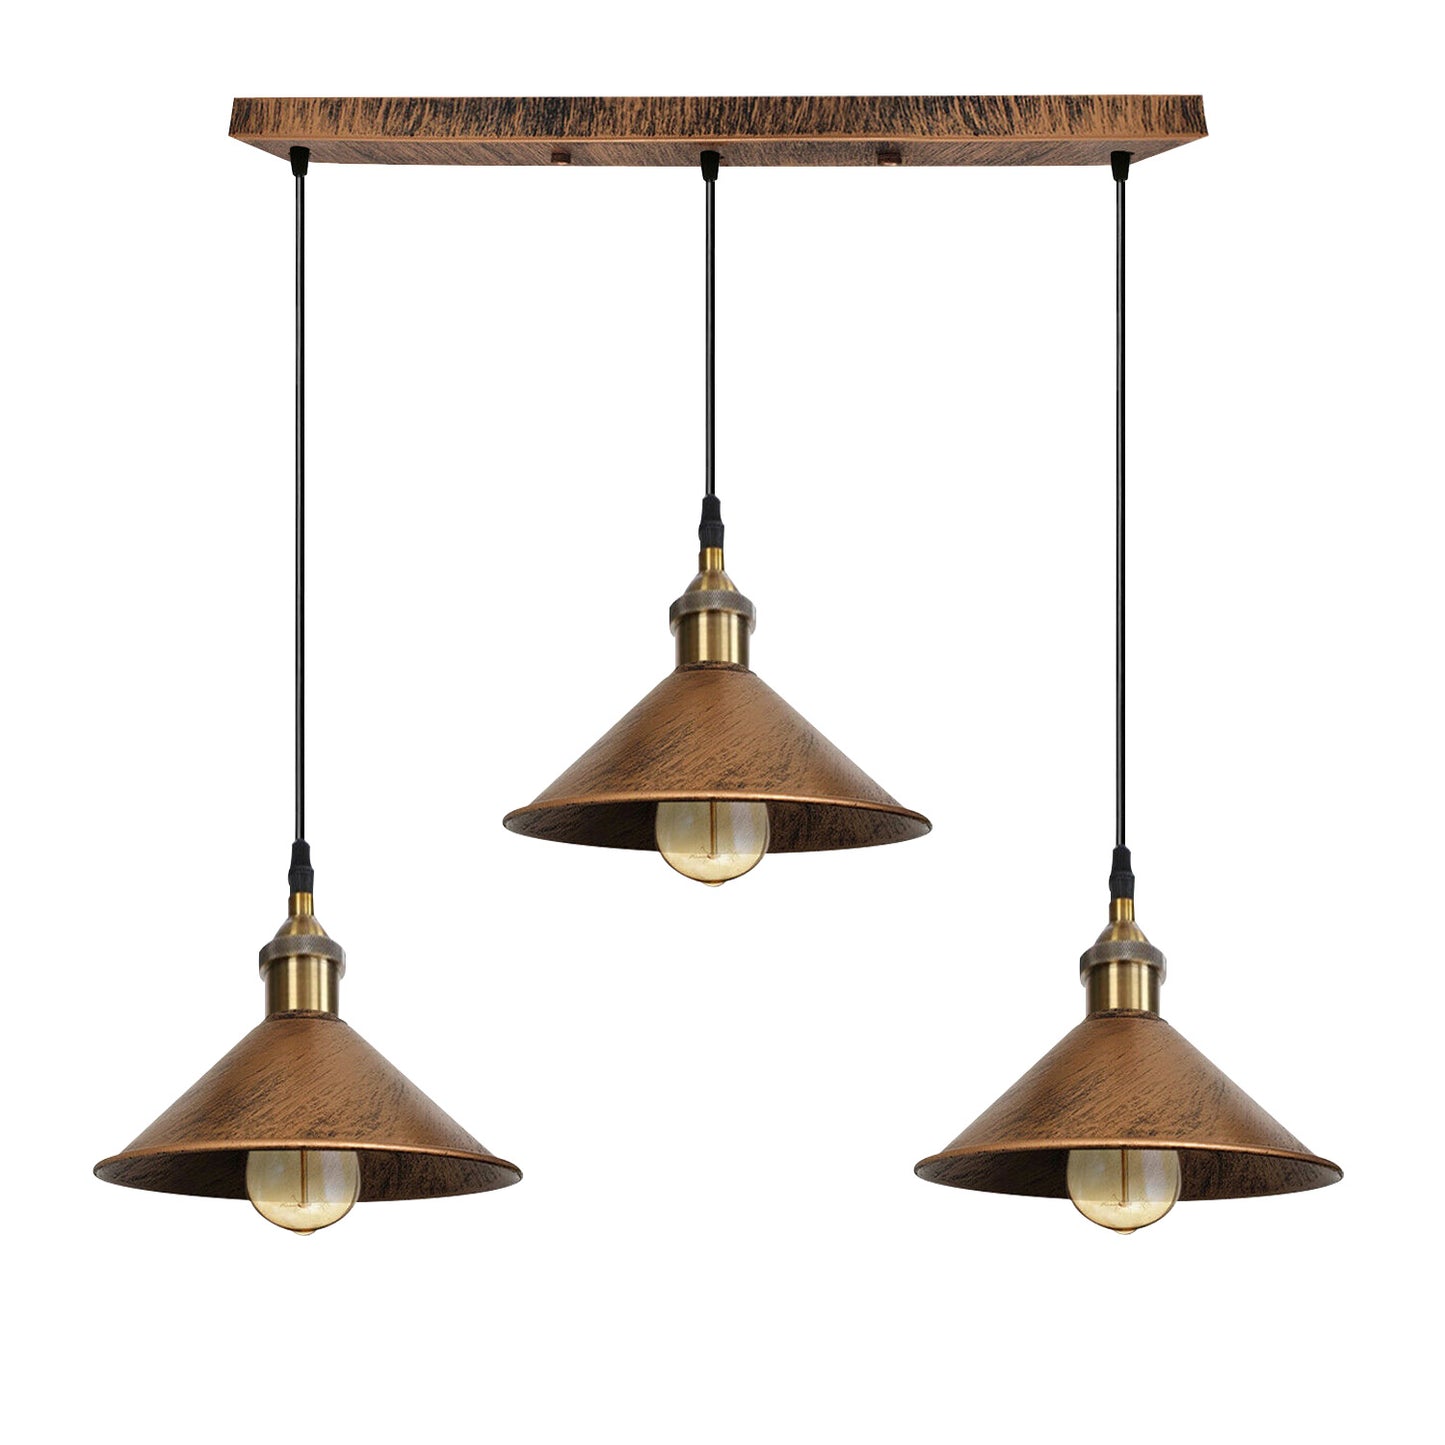 Brushed Brass Industrial 3 Head Metal Cone Shade Pendant Light~2144